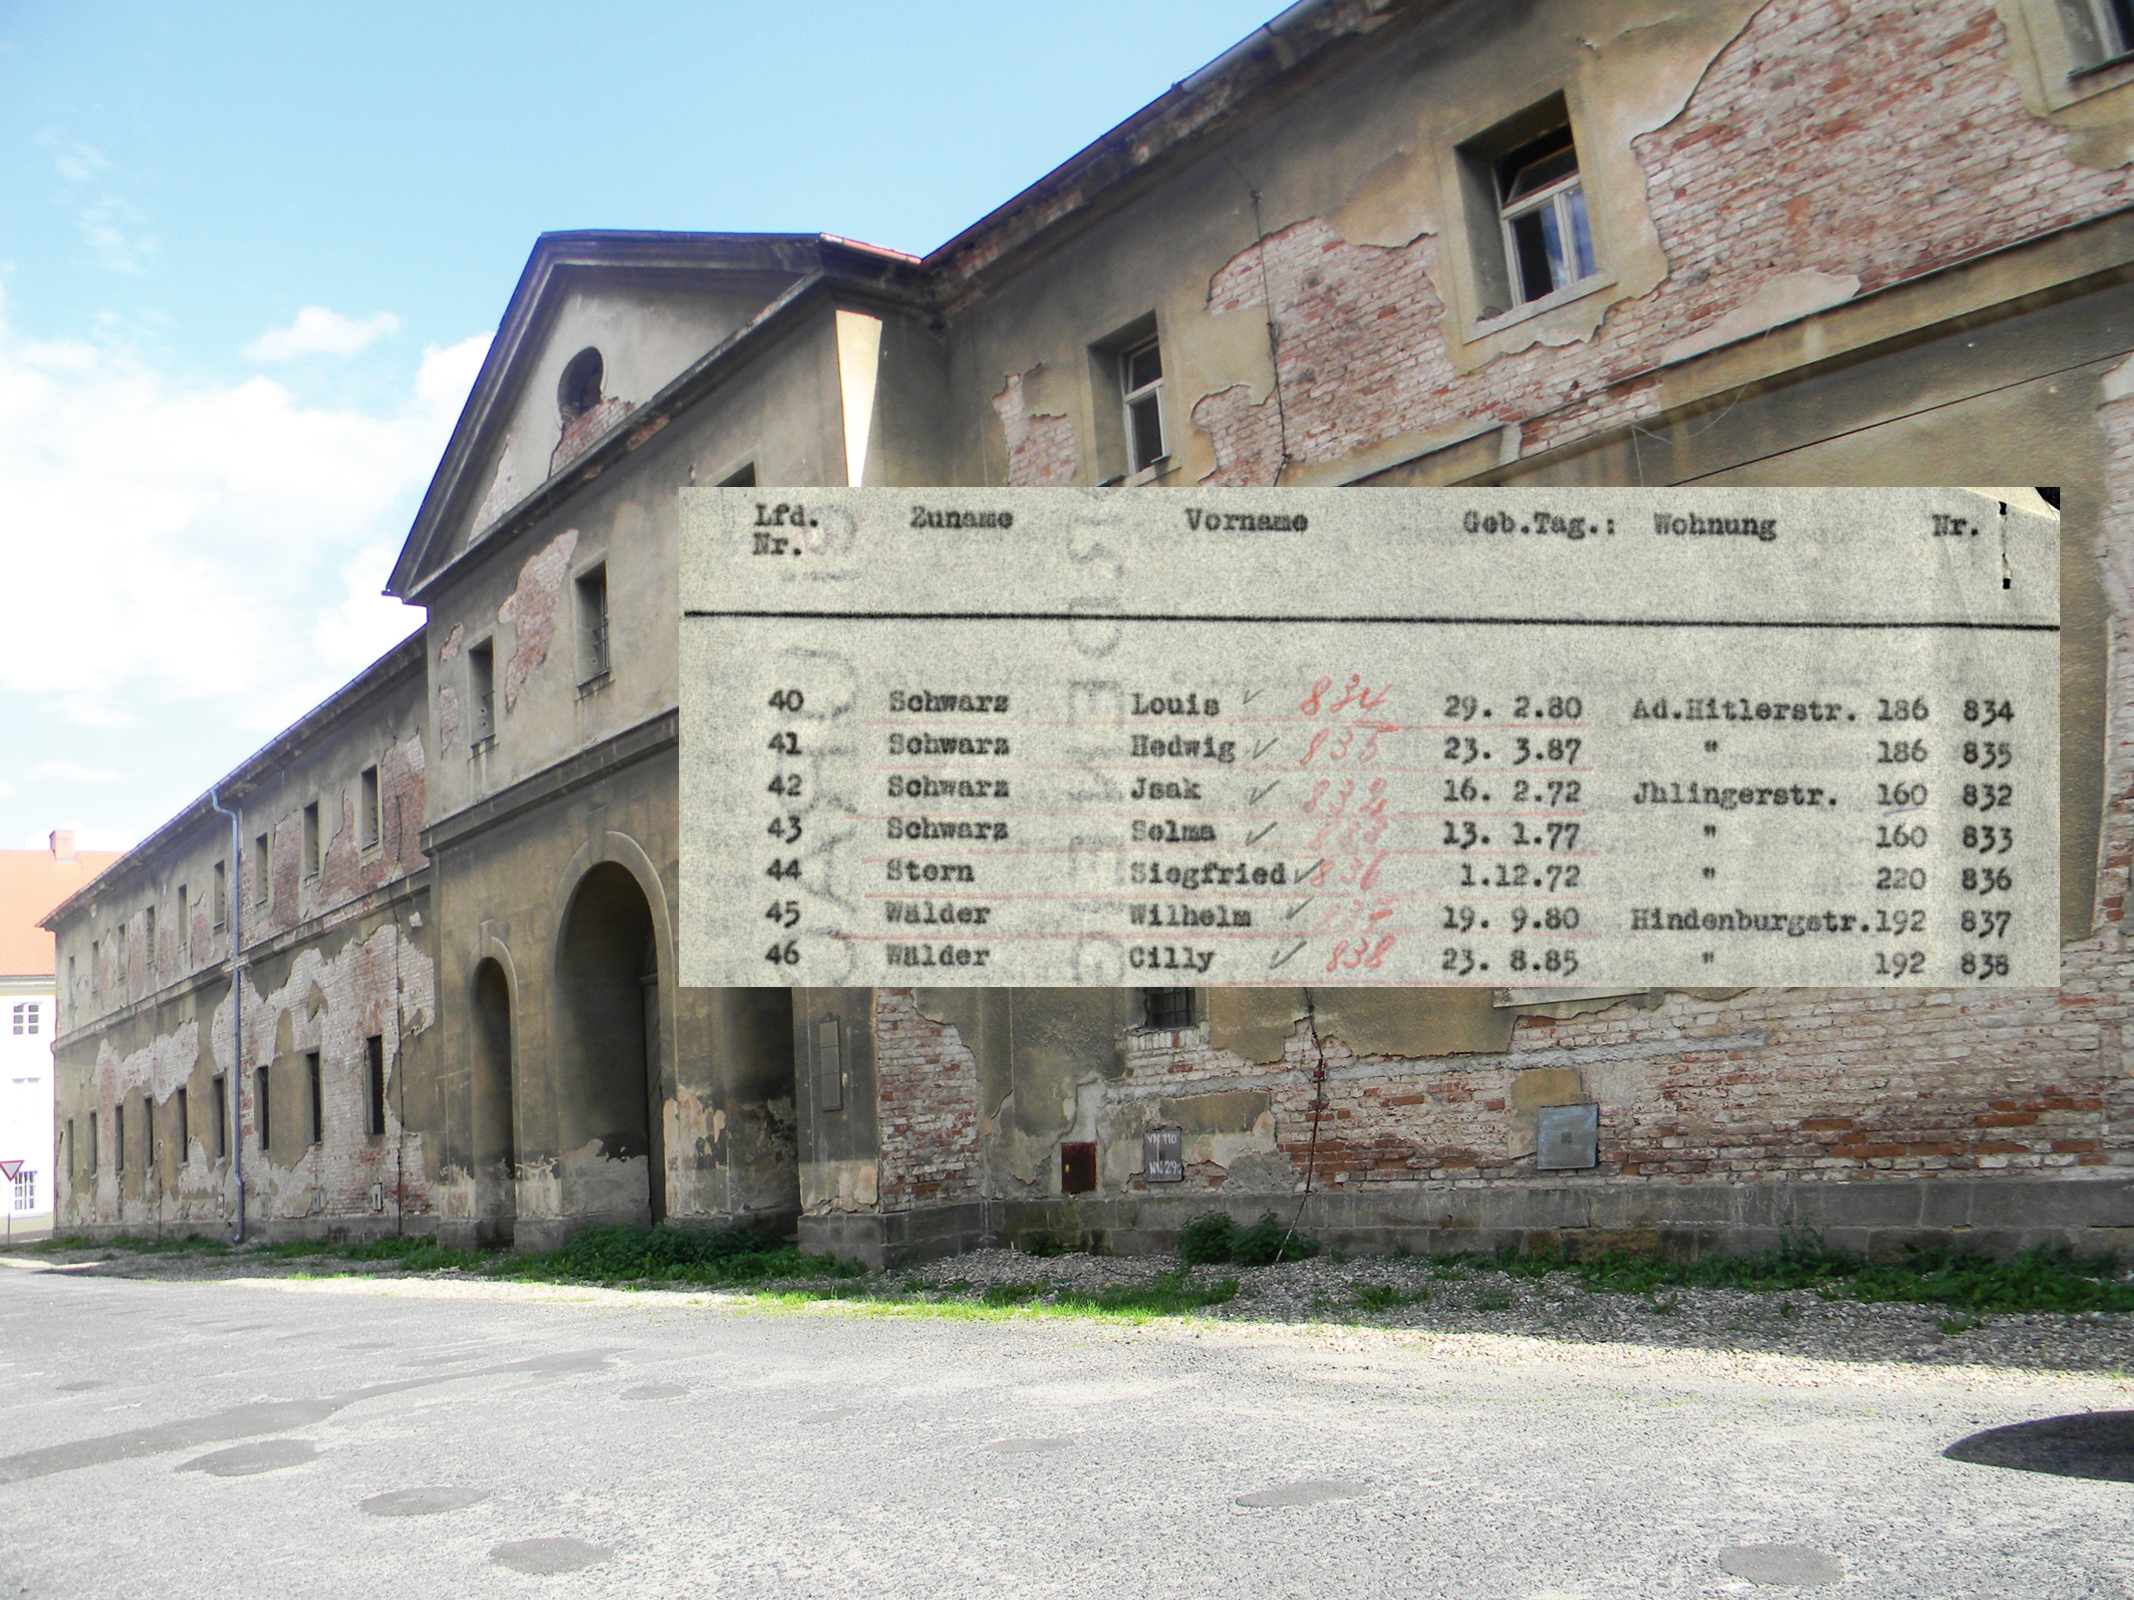 The Hannover barracks in Theresienstadt and deportation list.